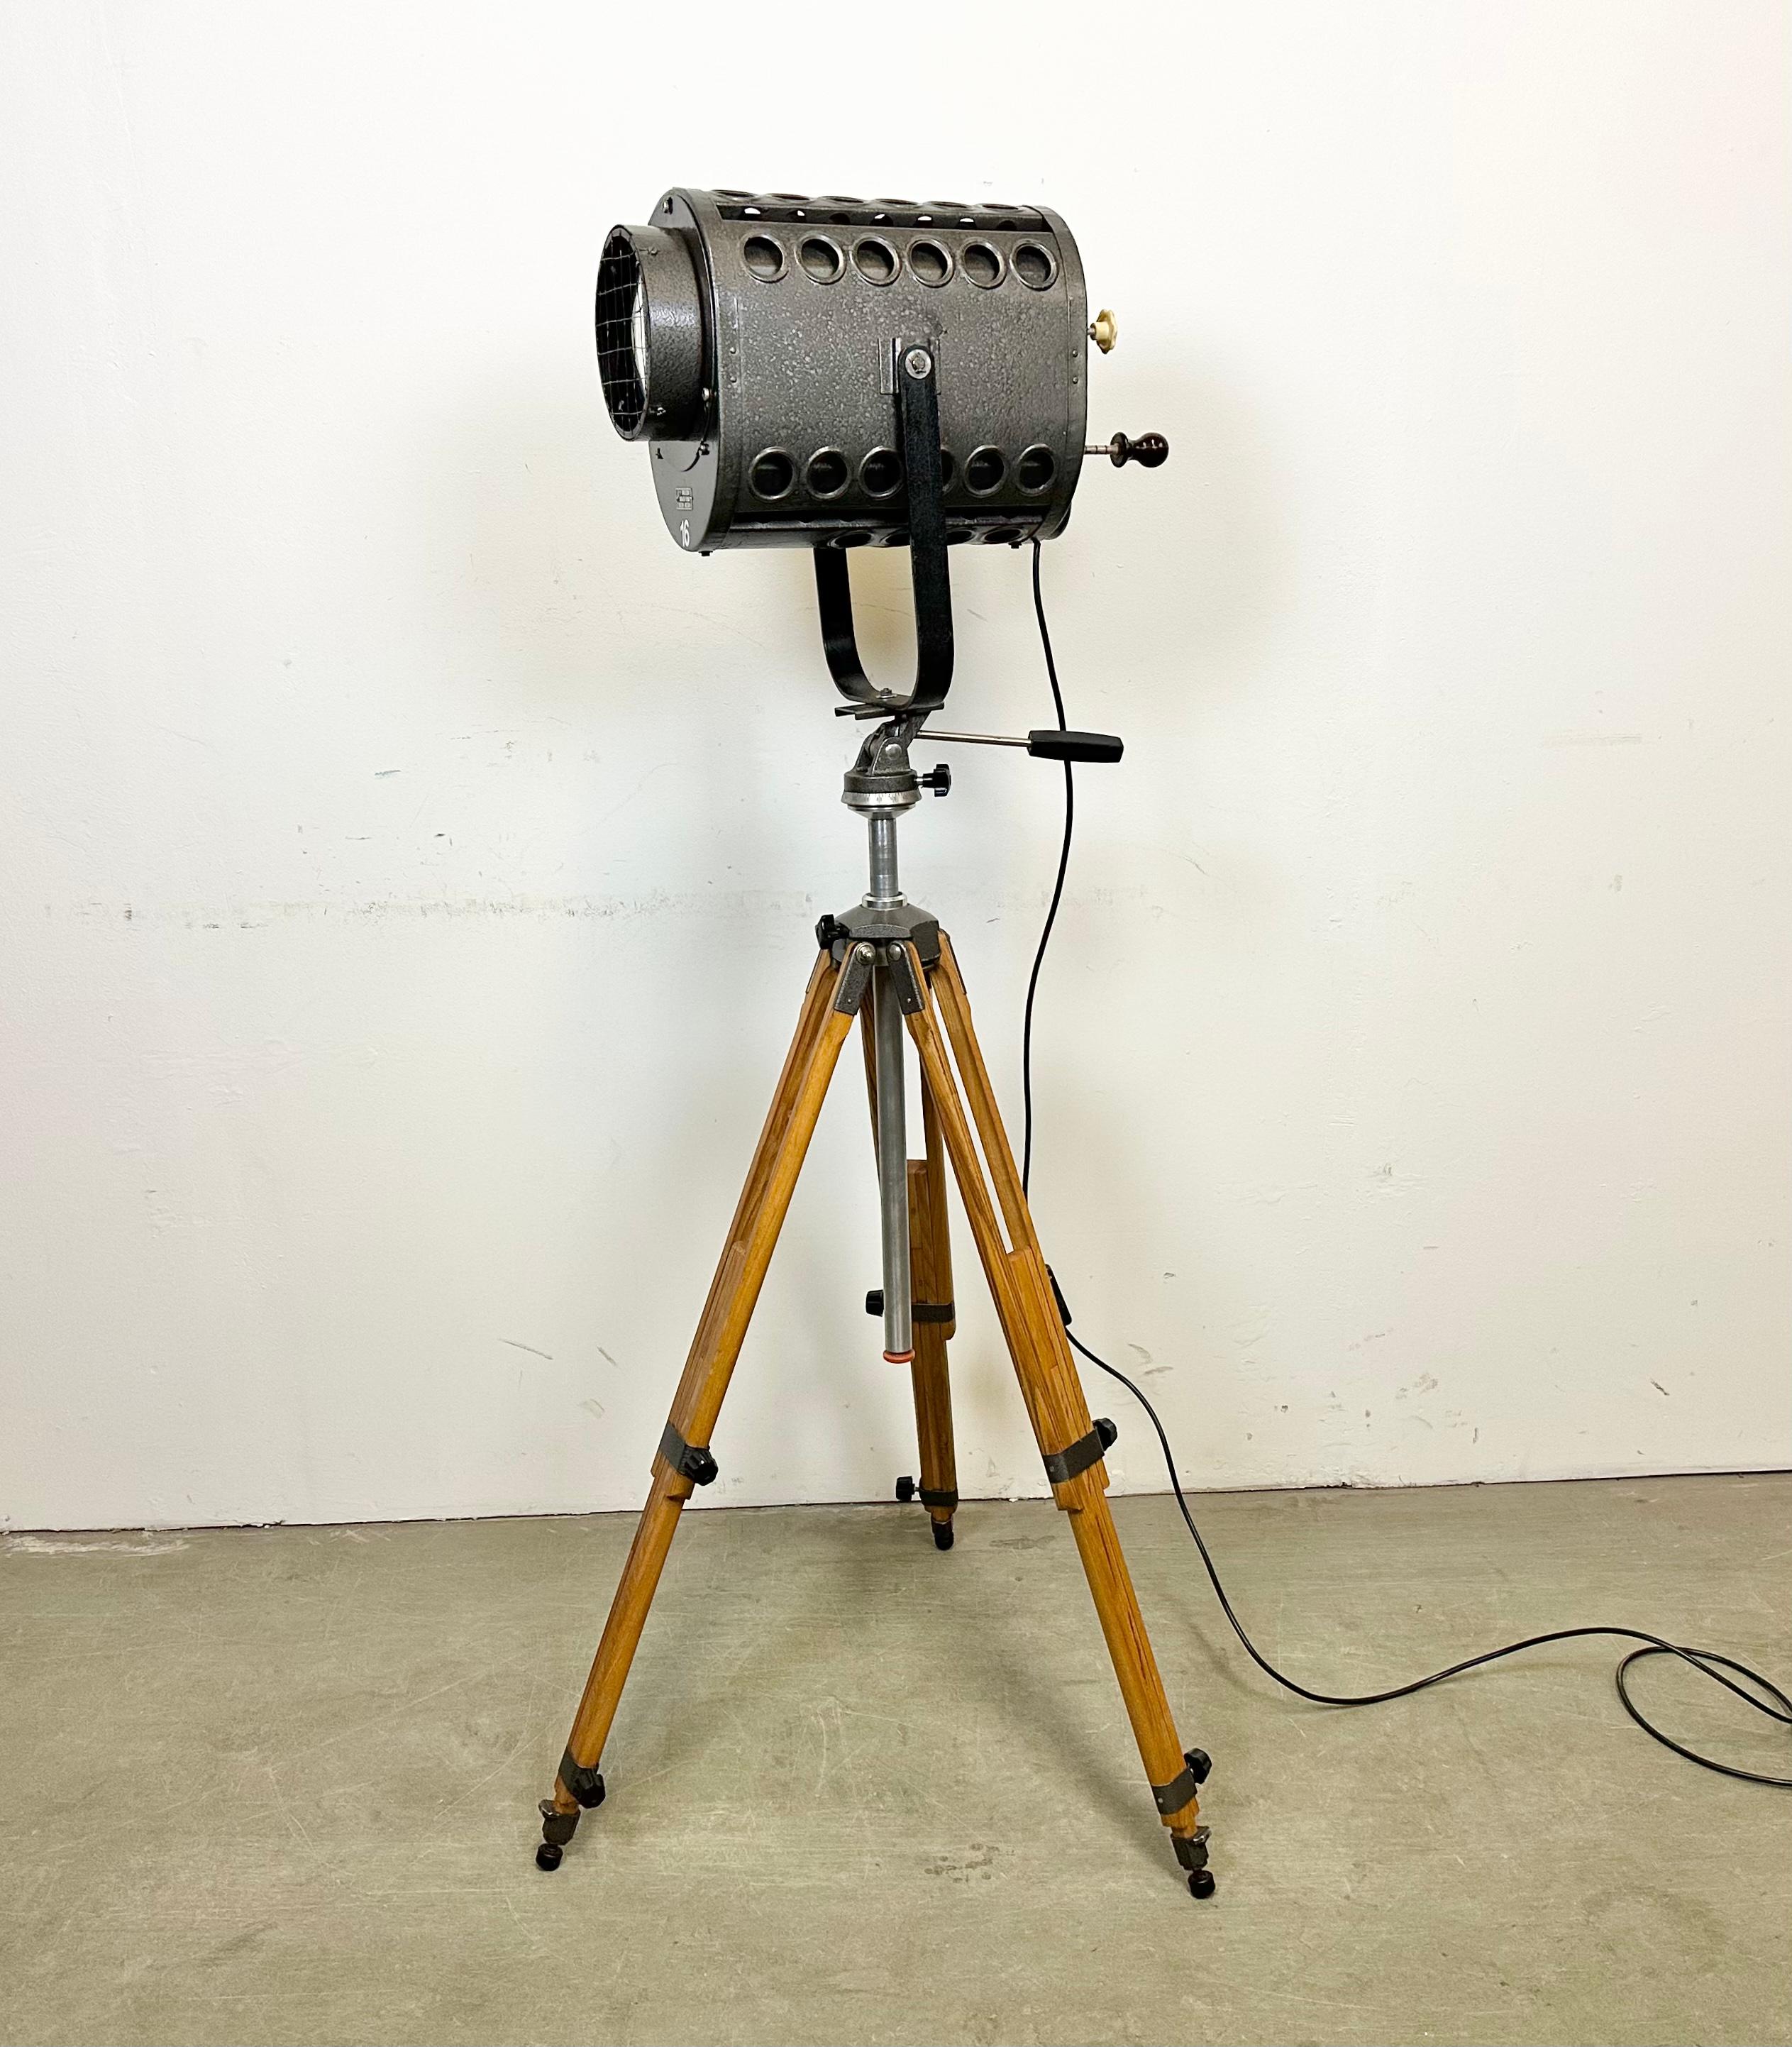 - Theatre spotlight made by Elektrosvit in former Czechoslovakia on wooden tripod
- Adjustable height and angle
- Grey hammerpaint metal body
- Glass lens
- The porcelain socket requires E 27/E 26 light bulbs.
- New wire.
- Dimensions of the